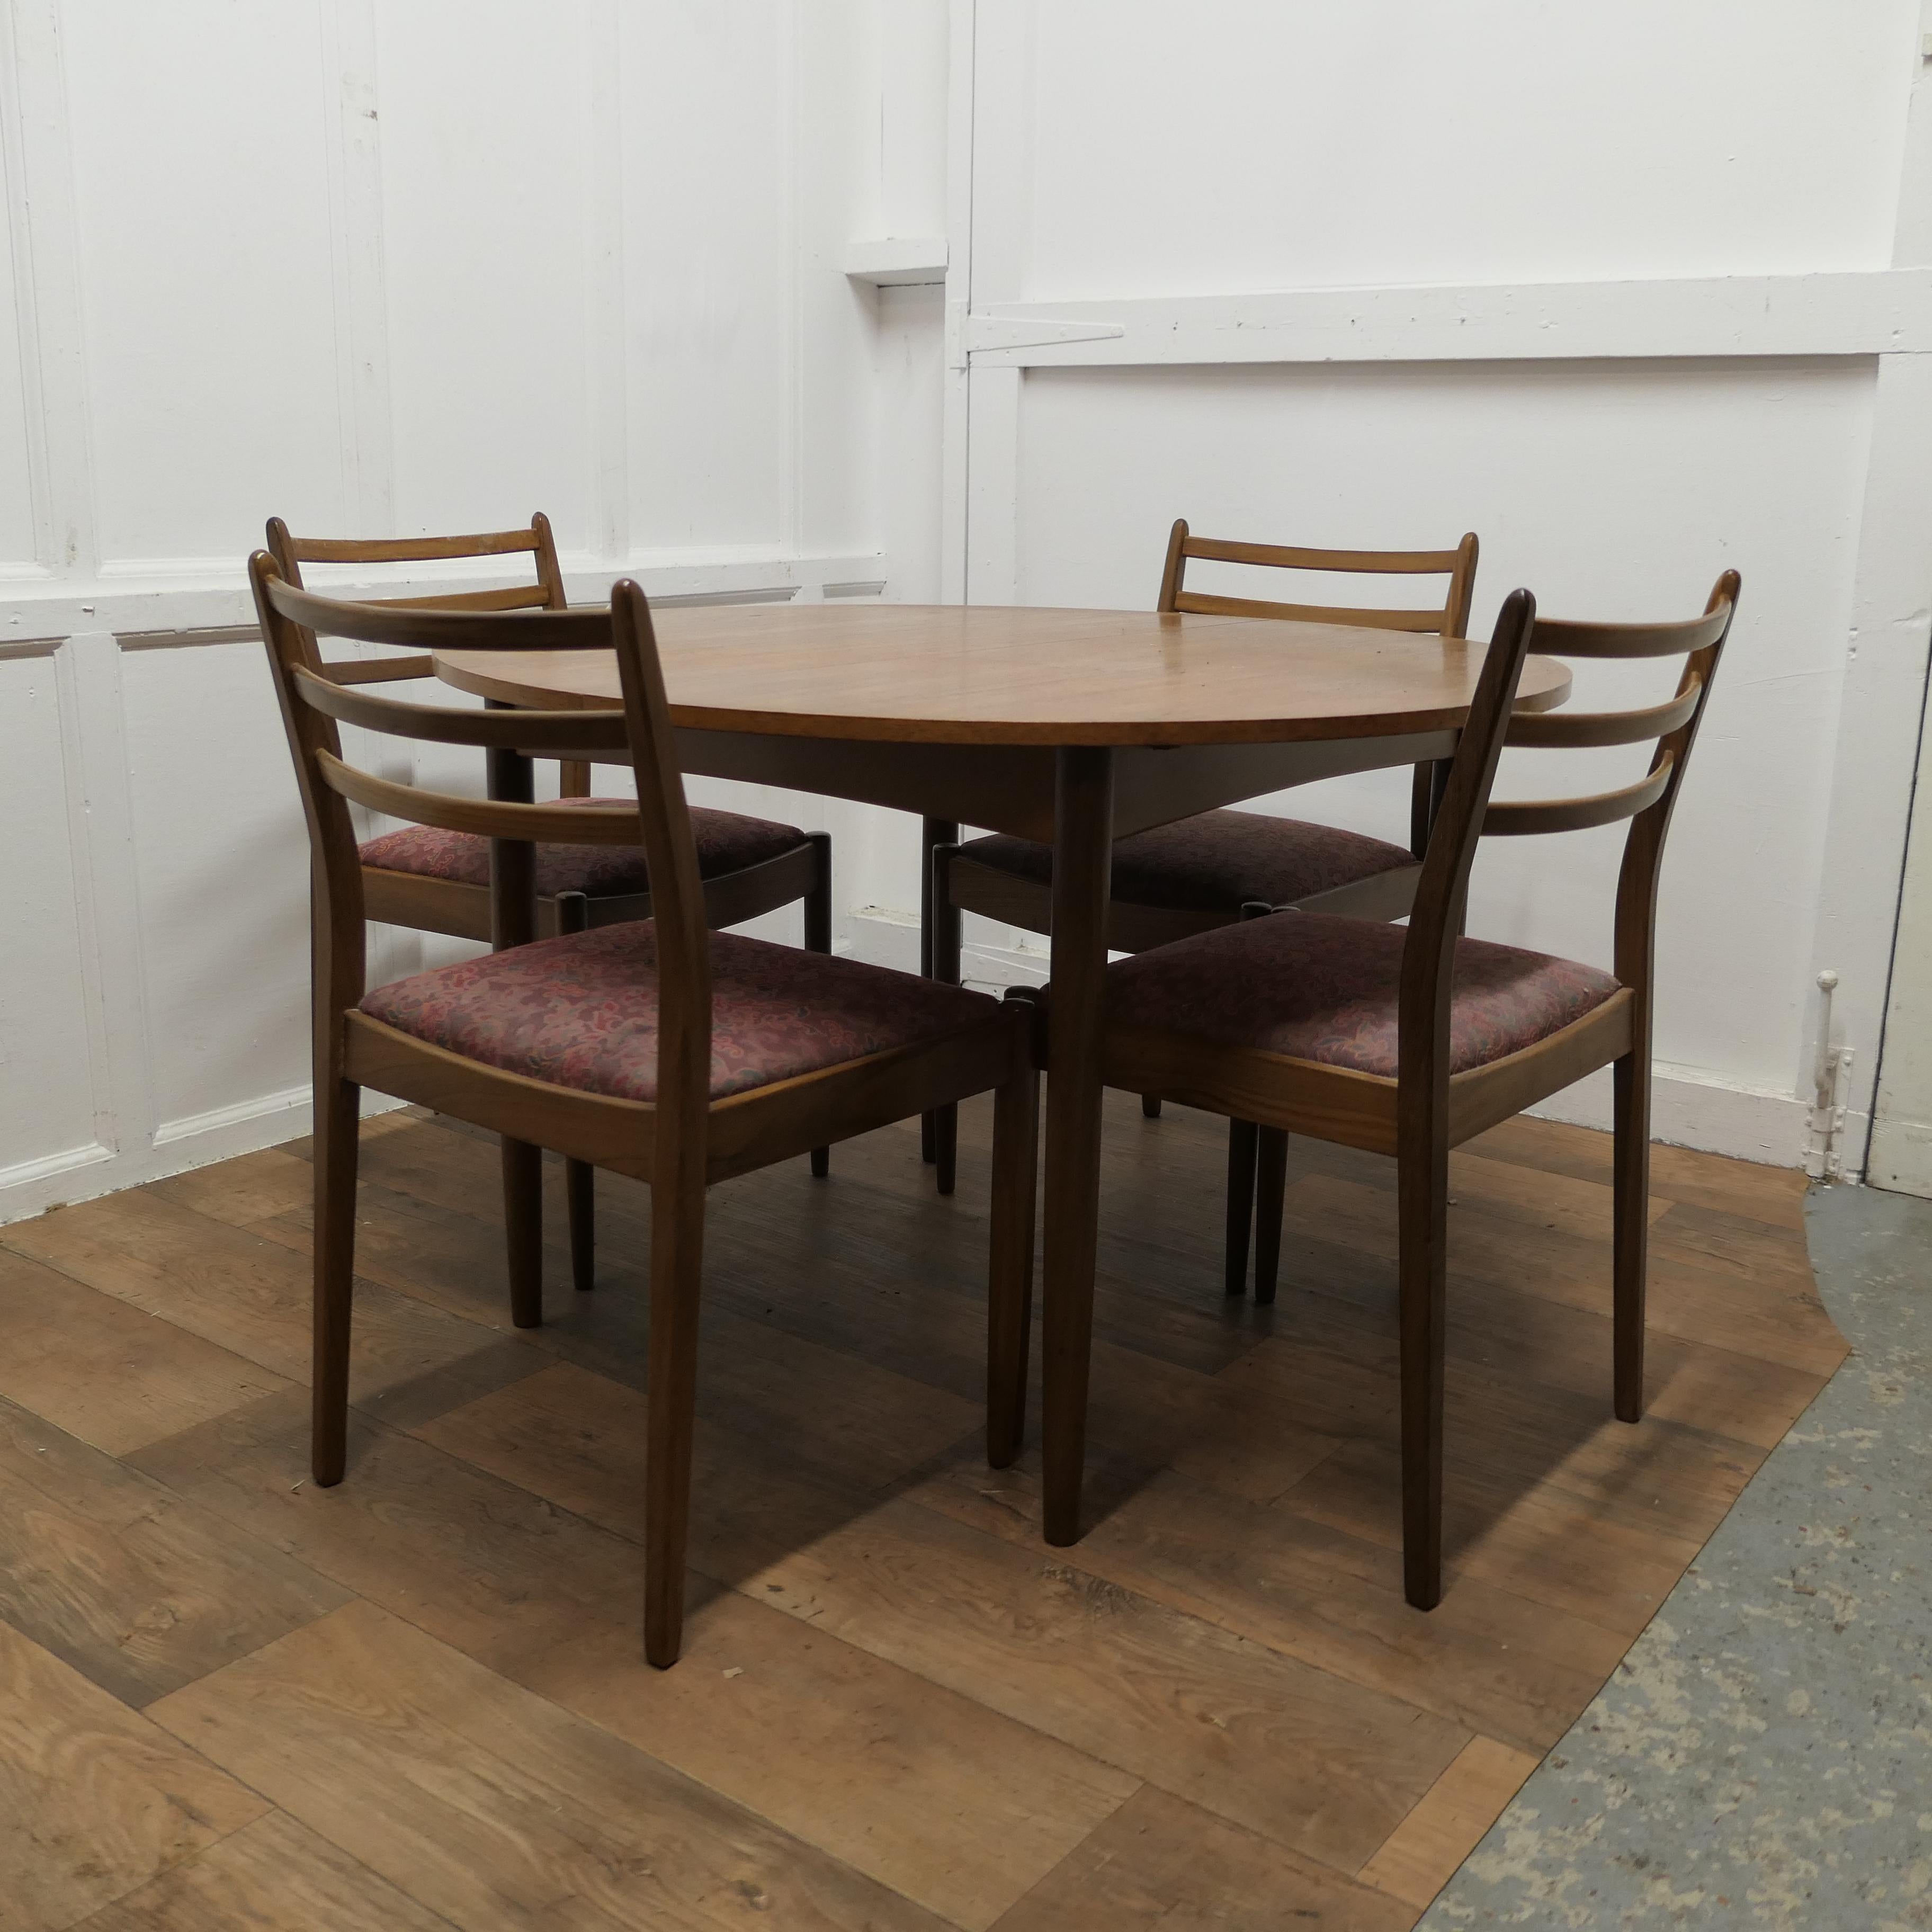 Mid Century G Plan Circular Extending Dining Table and 4 Chairs

The Table is in Teak from the Fresco Danish Range produced in the 1960s and 1970s
The table is circular when closed and extends using the centre pop up leaf, when fully extended the